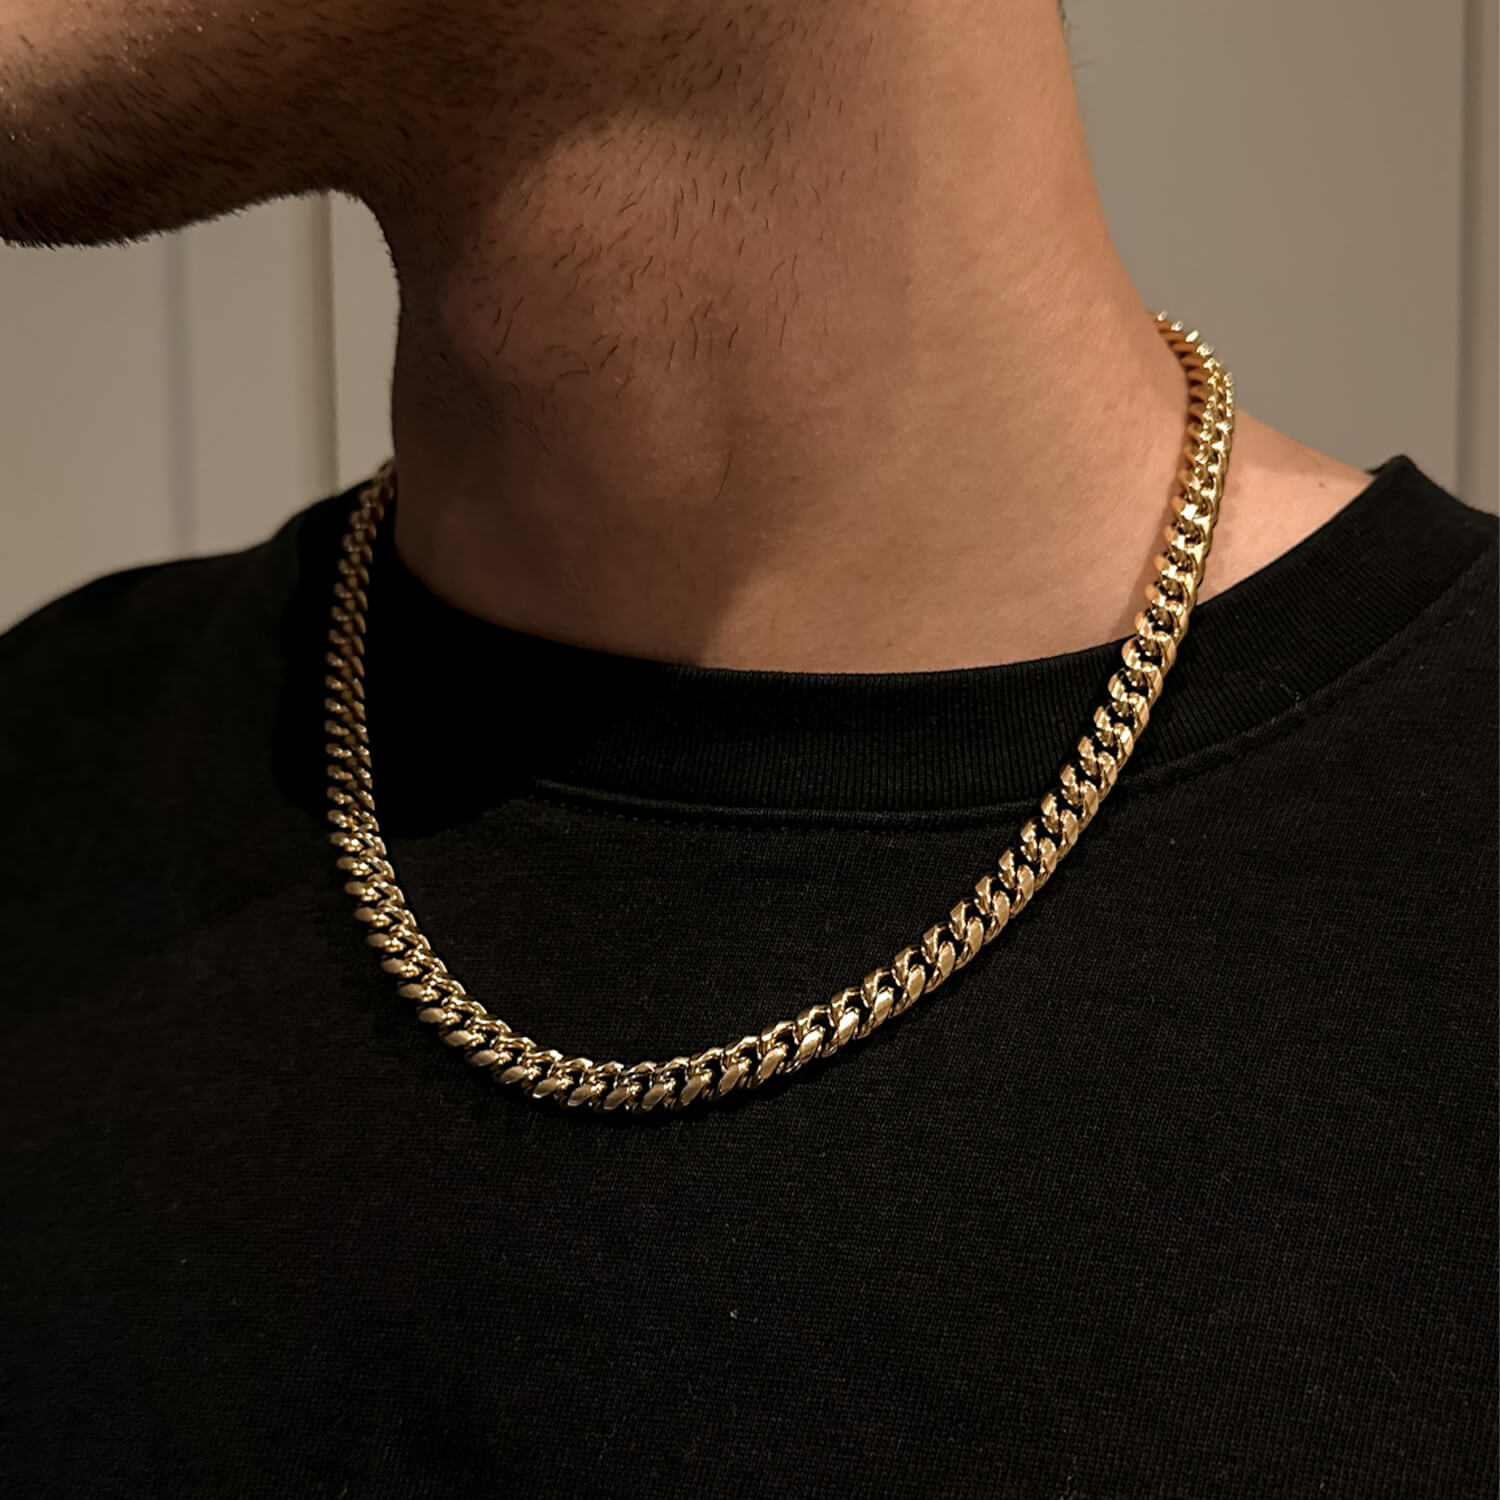 male wearing 8mm gold miami cuban link chain on neck